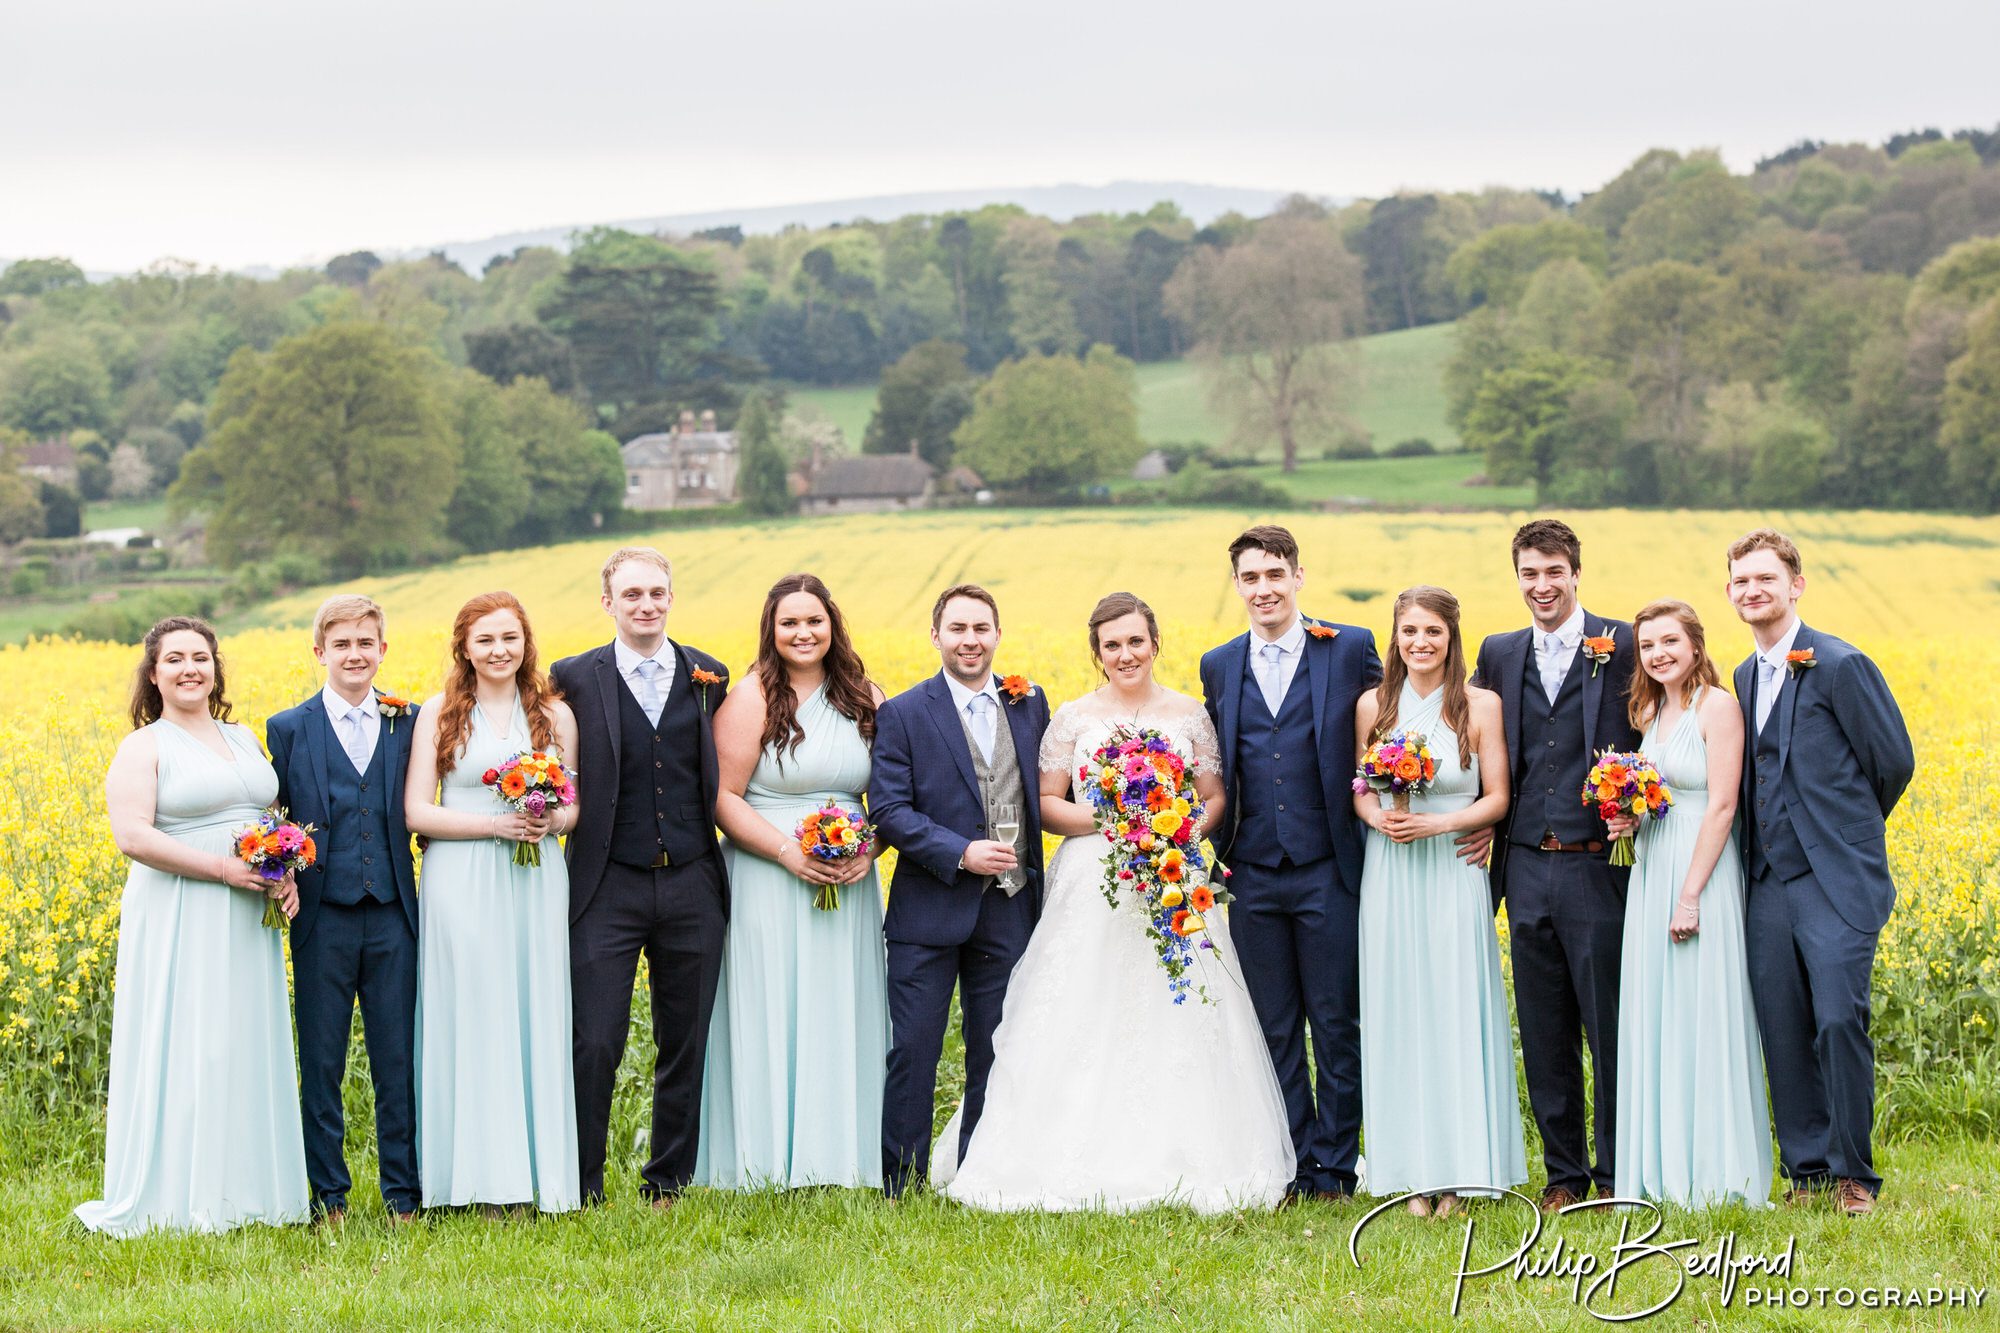 Fitzleroi Barn wedding photographer - bridal party group photograph with West Sussex countryside in the background.